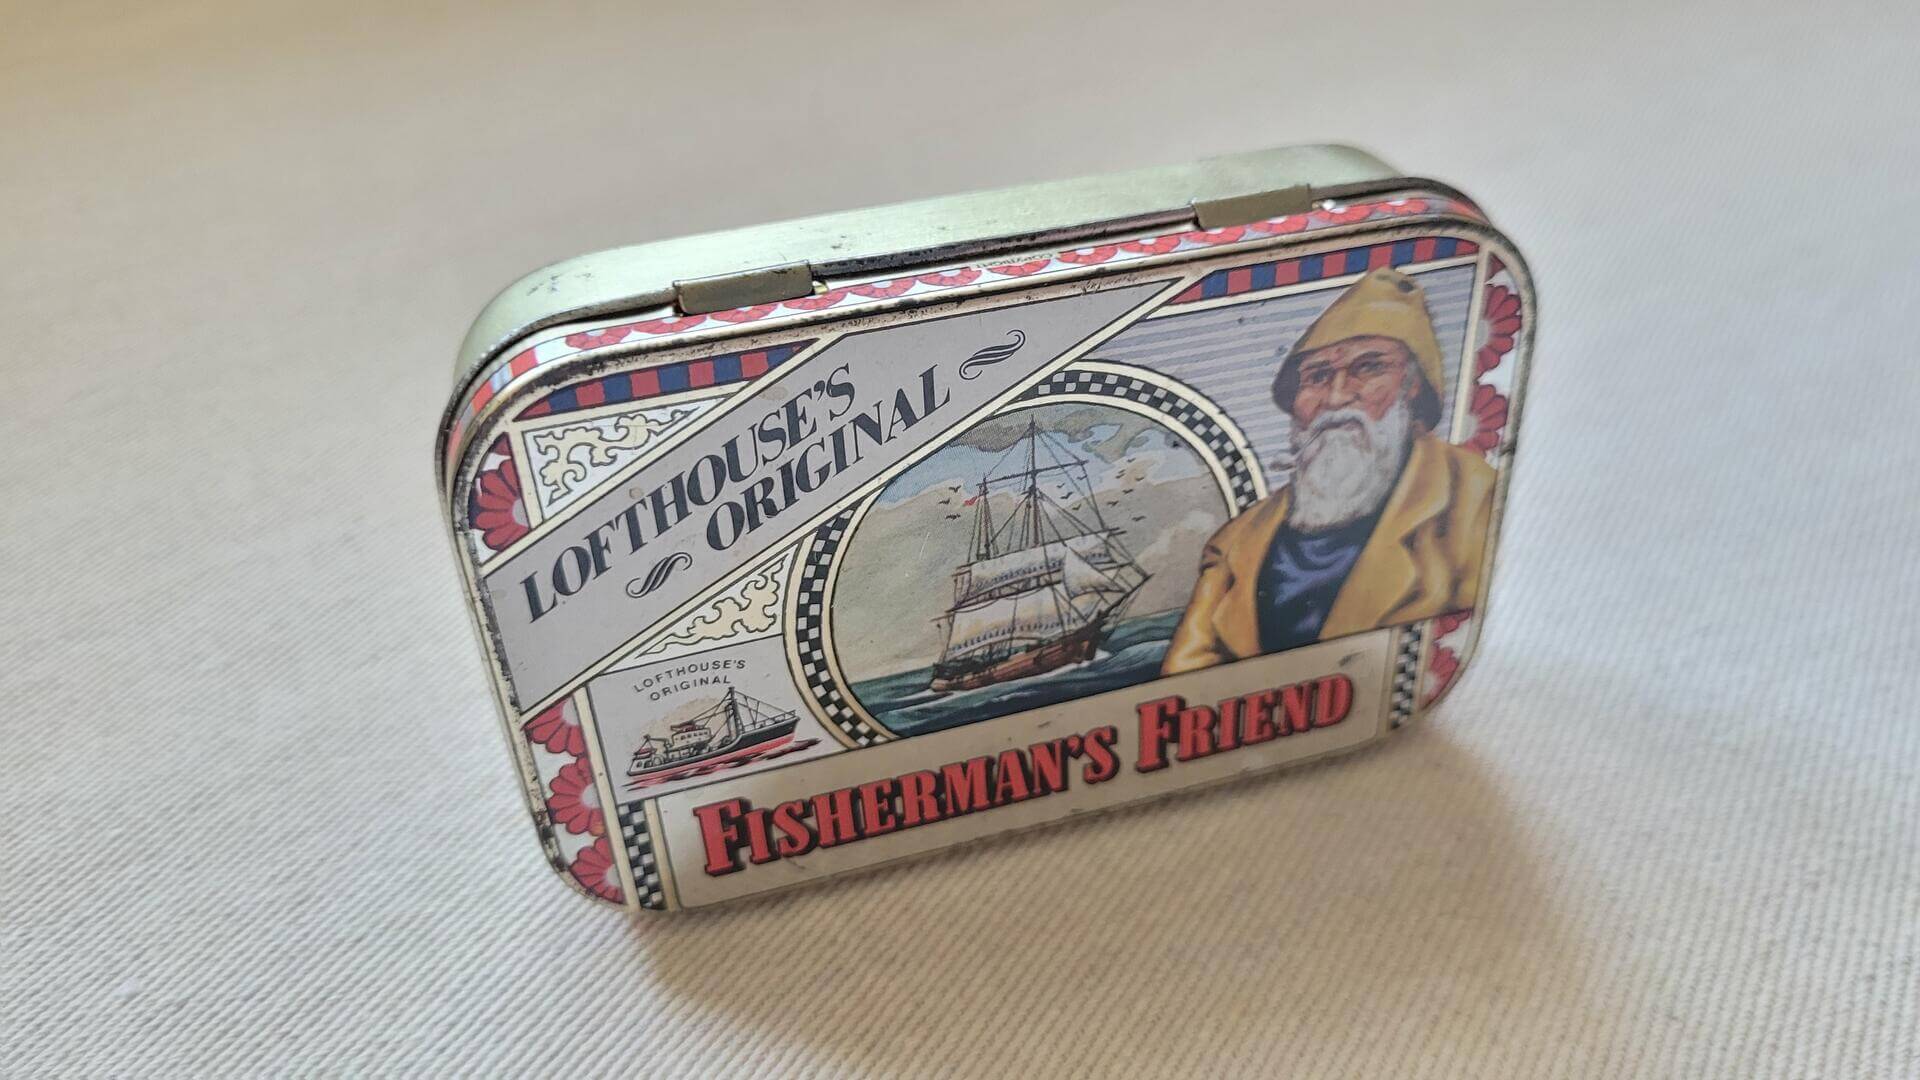 Vintage Fisherman's Friend Collectable Lofthouse's Original Tin Box - Made in England Storage and Advertising Memorabilia